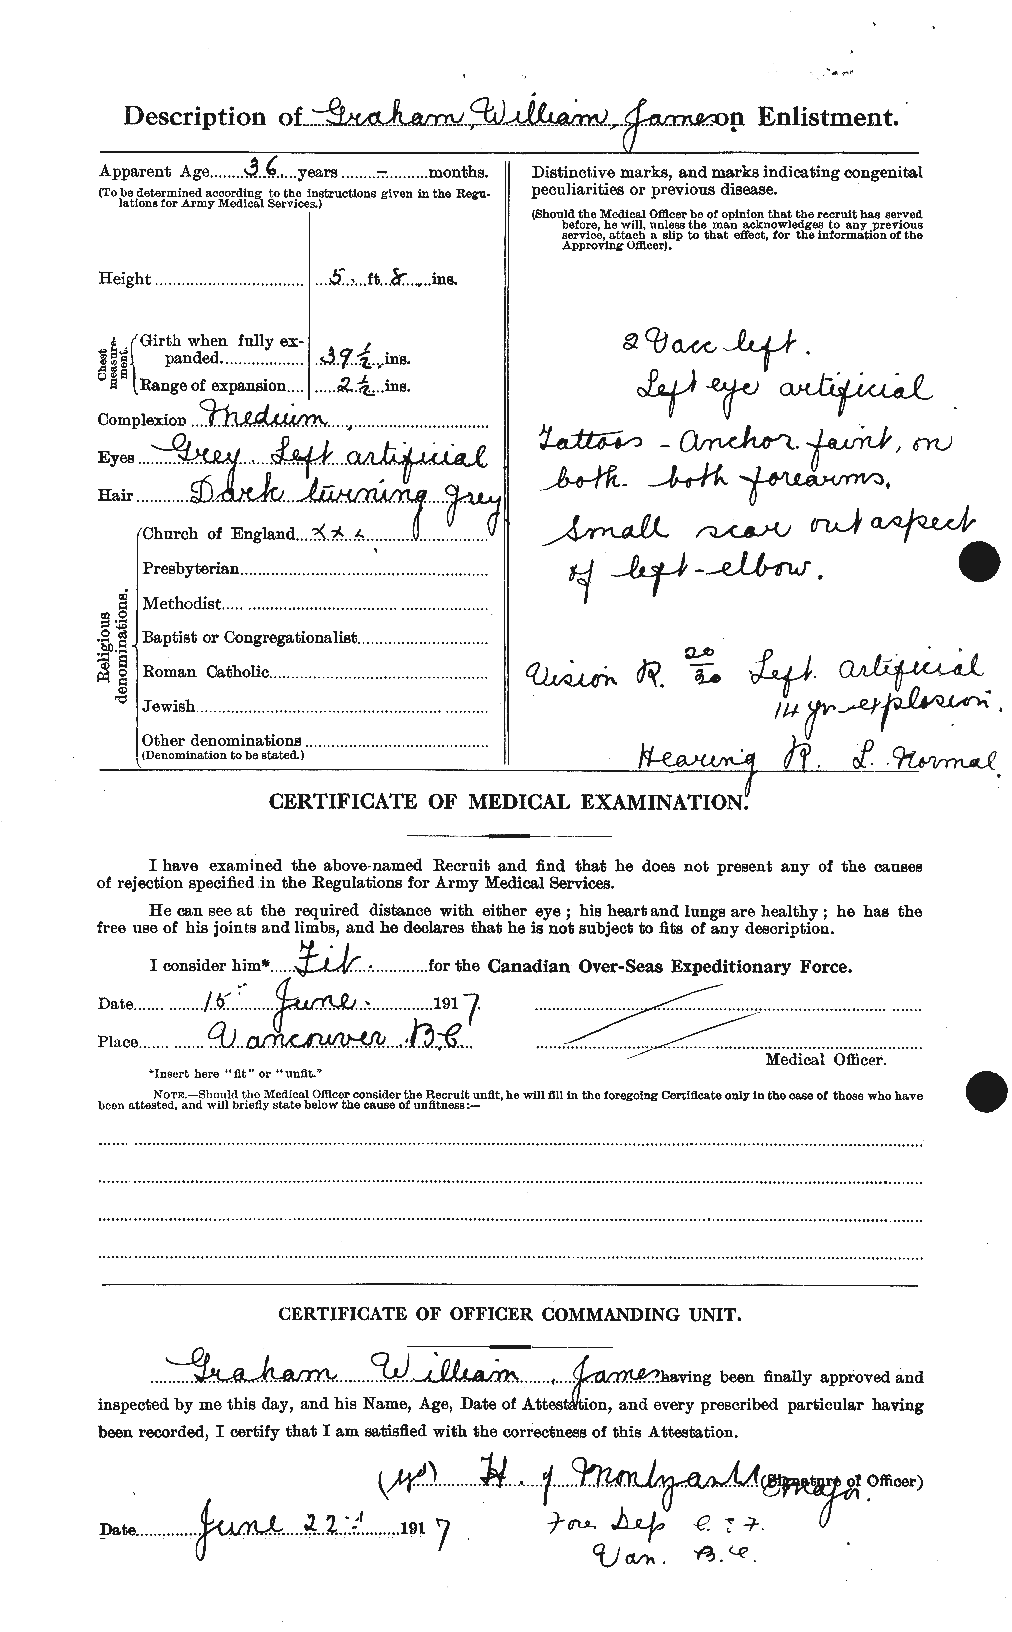 Personnel Records of the First World War - CEF 691151b